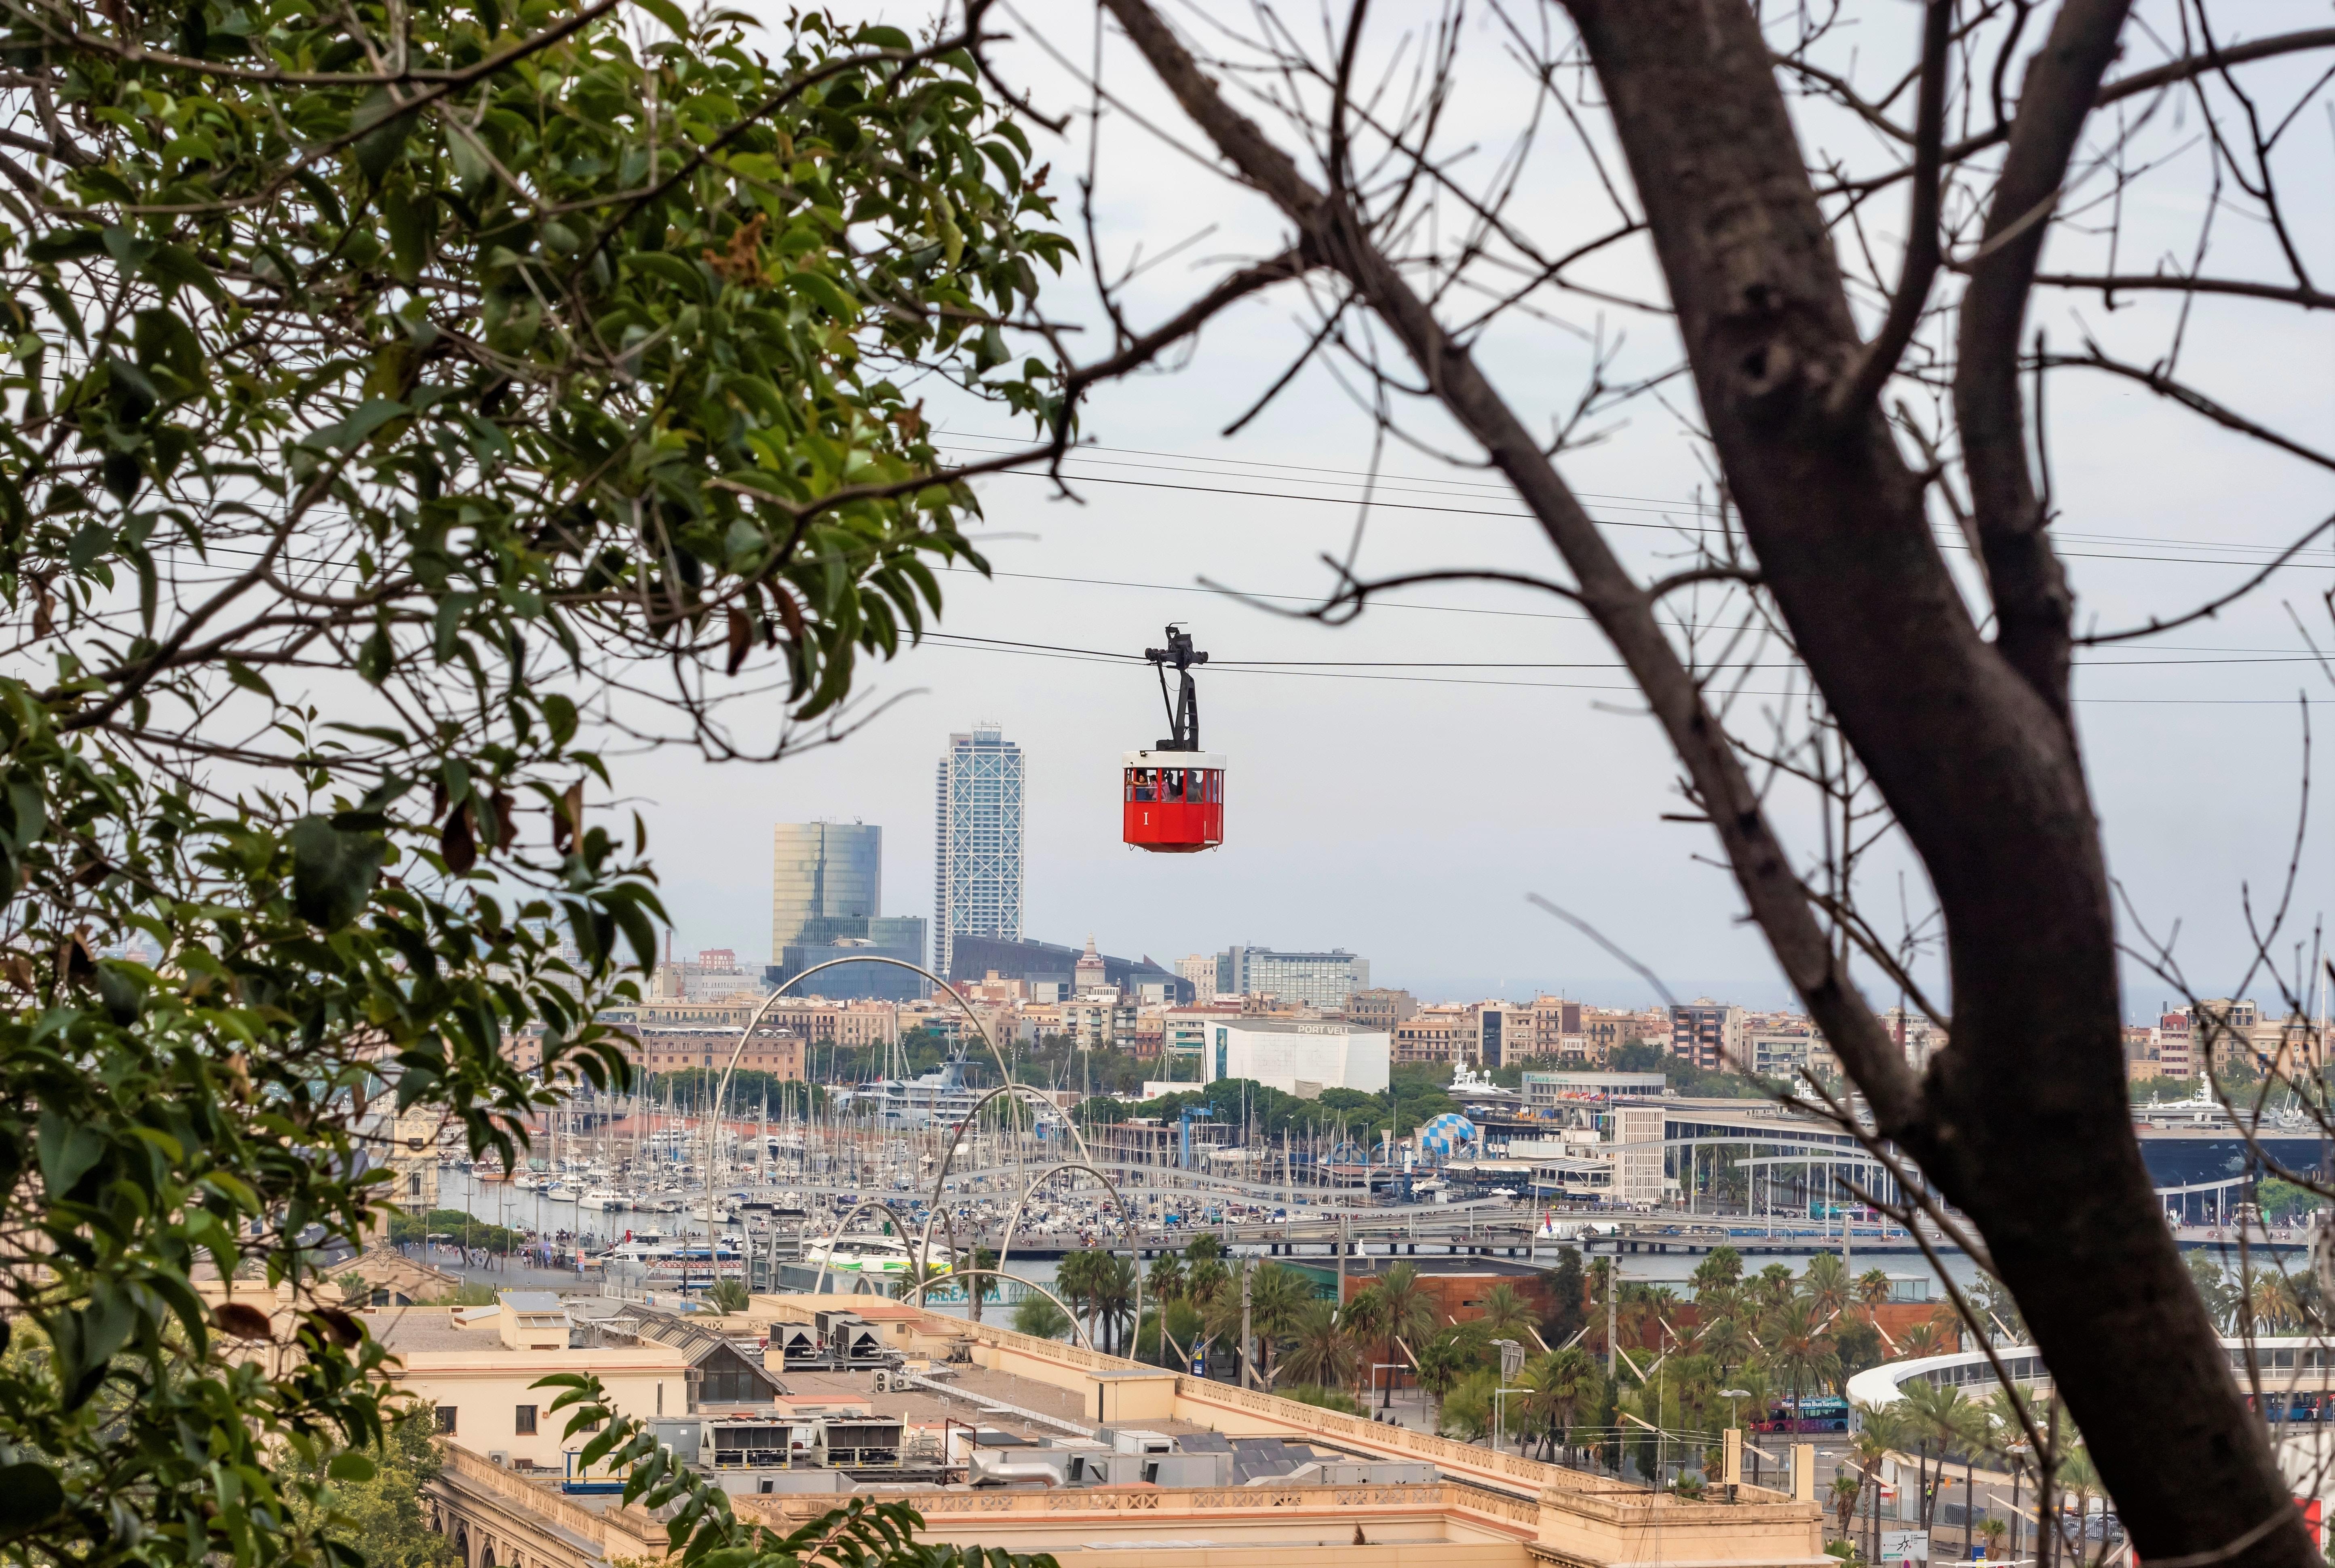 Cable Car in Barcelona